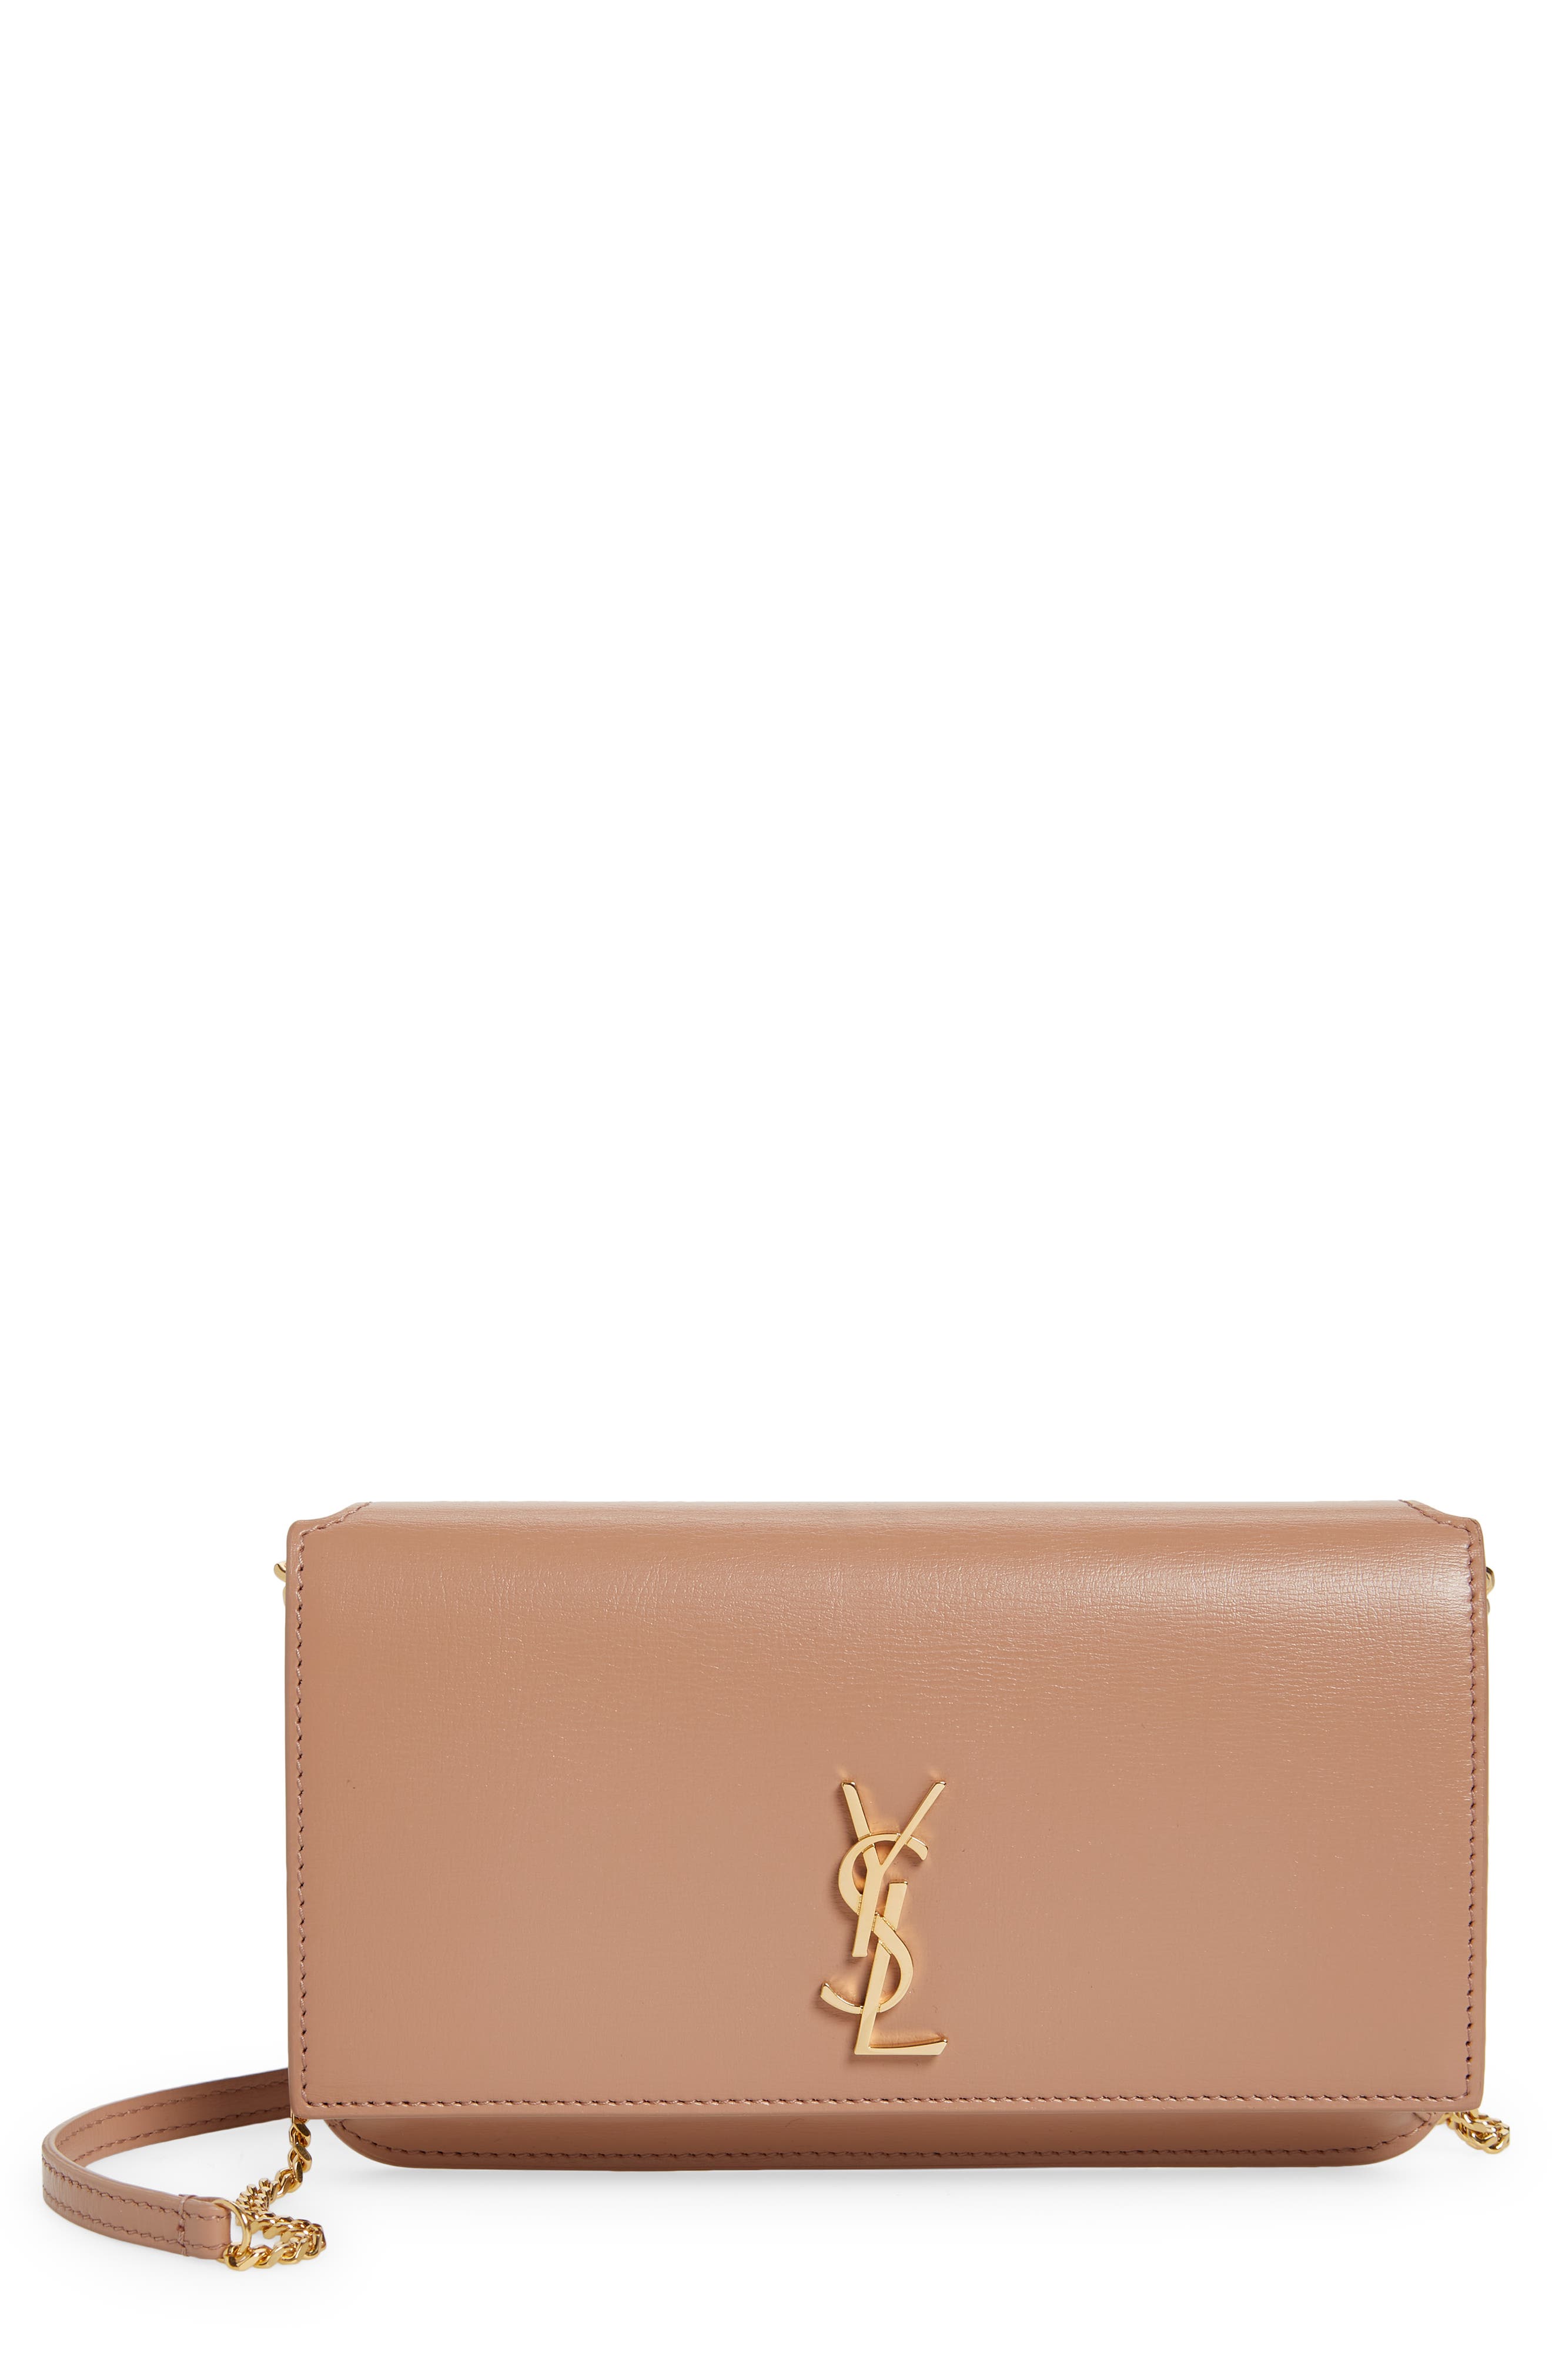 Saint Laurent YSL Chain Wallet Nero in Black Leather With Gold